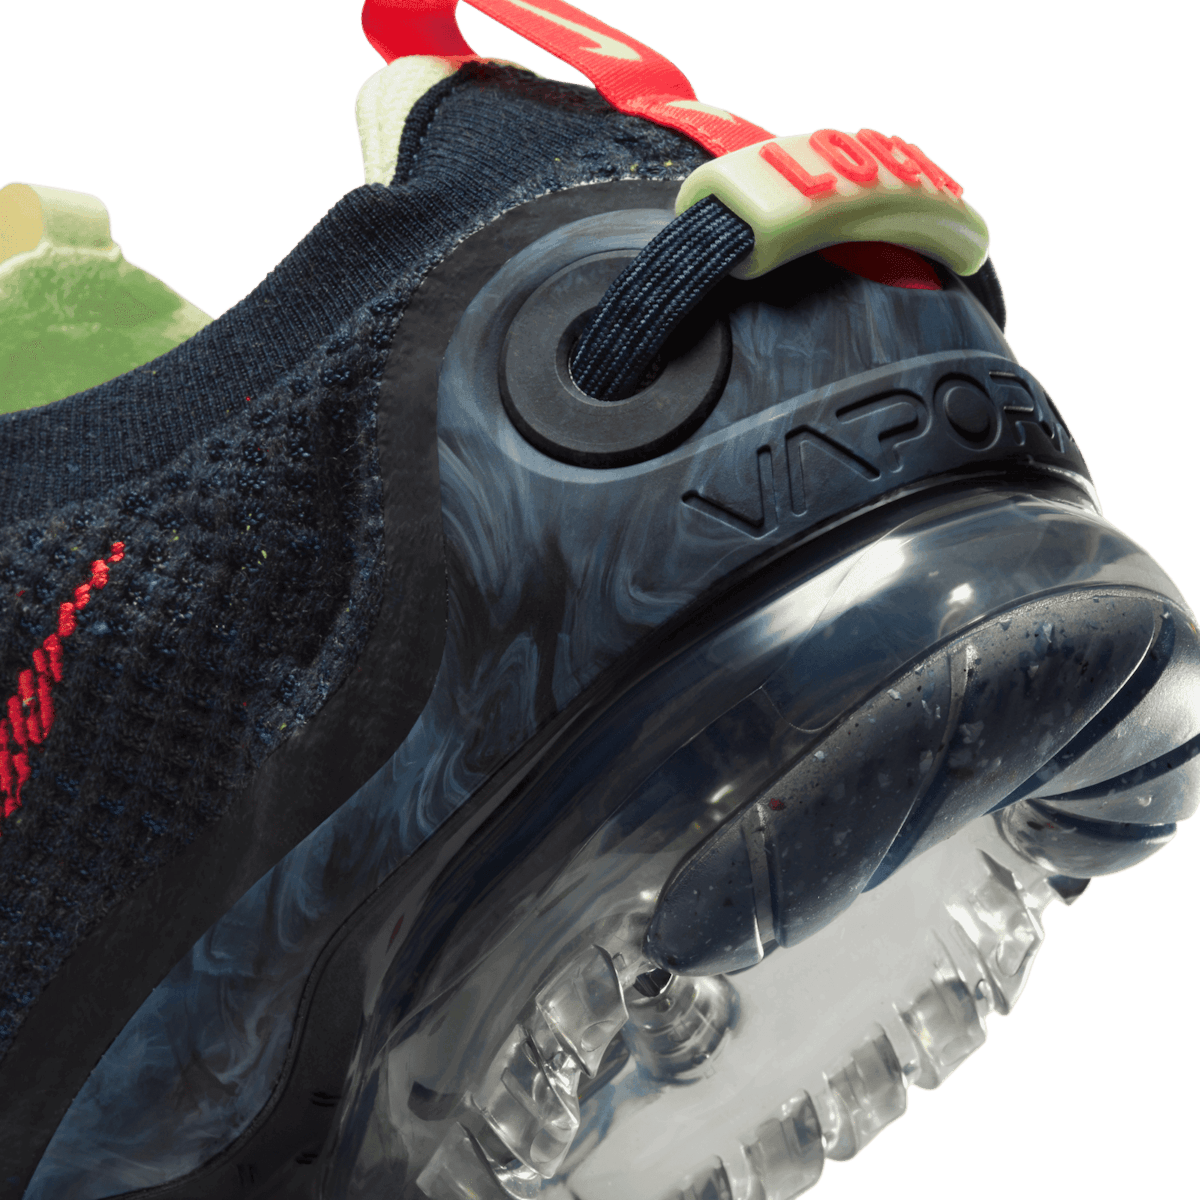 Nike Air VaporMax 2020 Flyknit 'Obsidian Siren Red' Angle 5